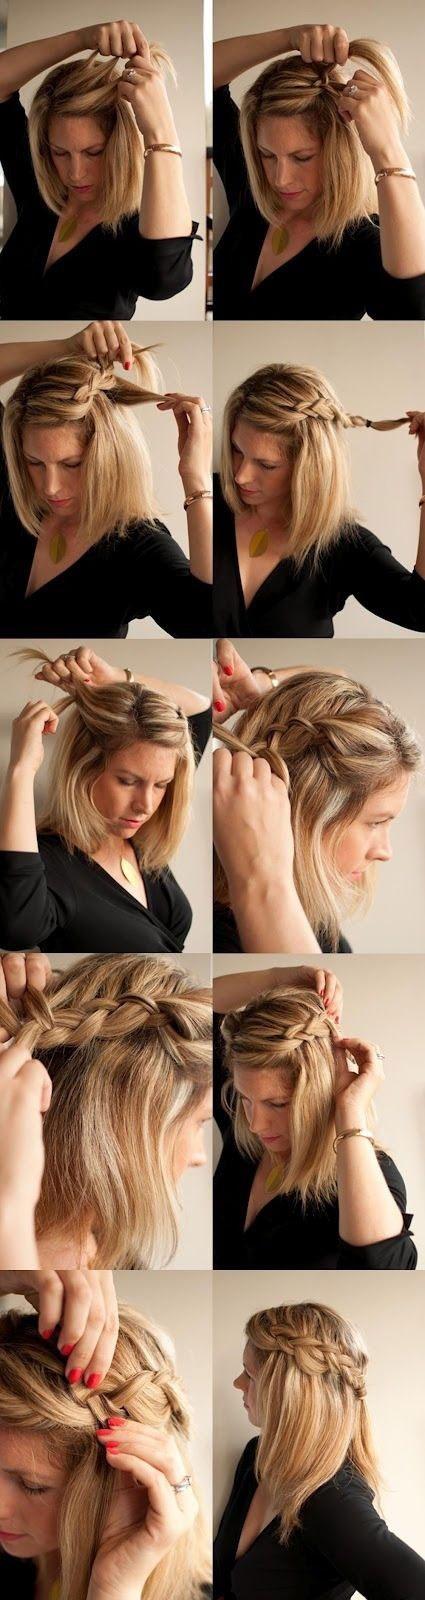 Cute quick hairstyles for shoulder length hair cute-quick-hairstyles-for-shoulder-length-hair-53_7